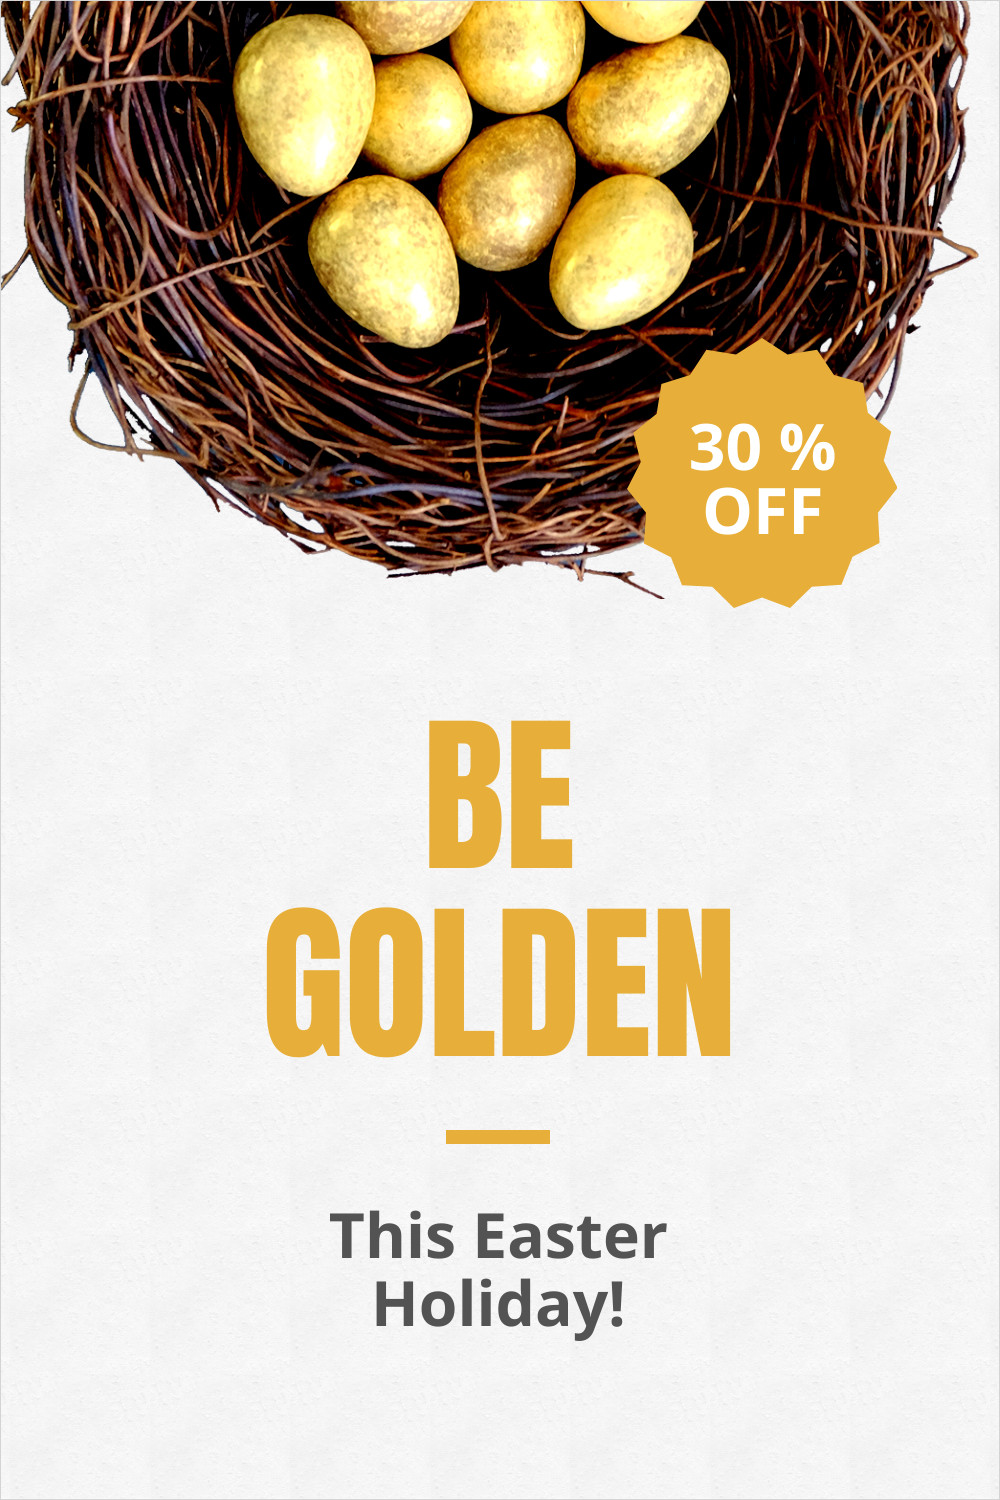 Golden Easter Egg with Promo